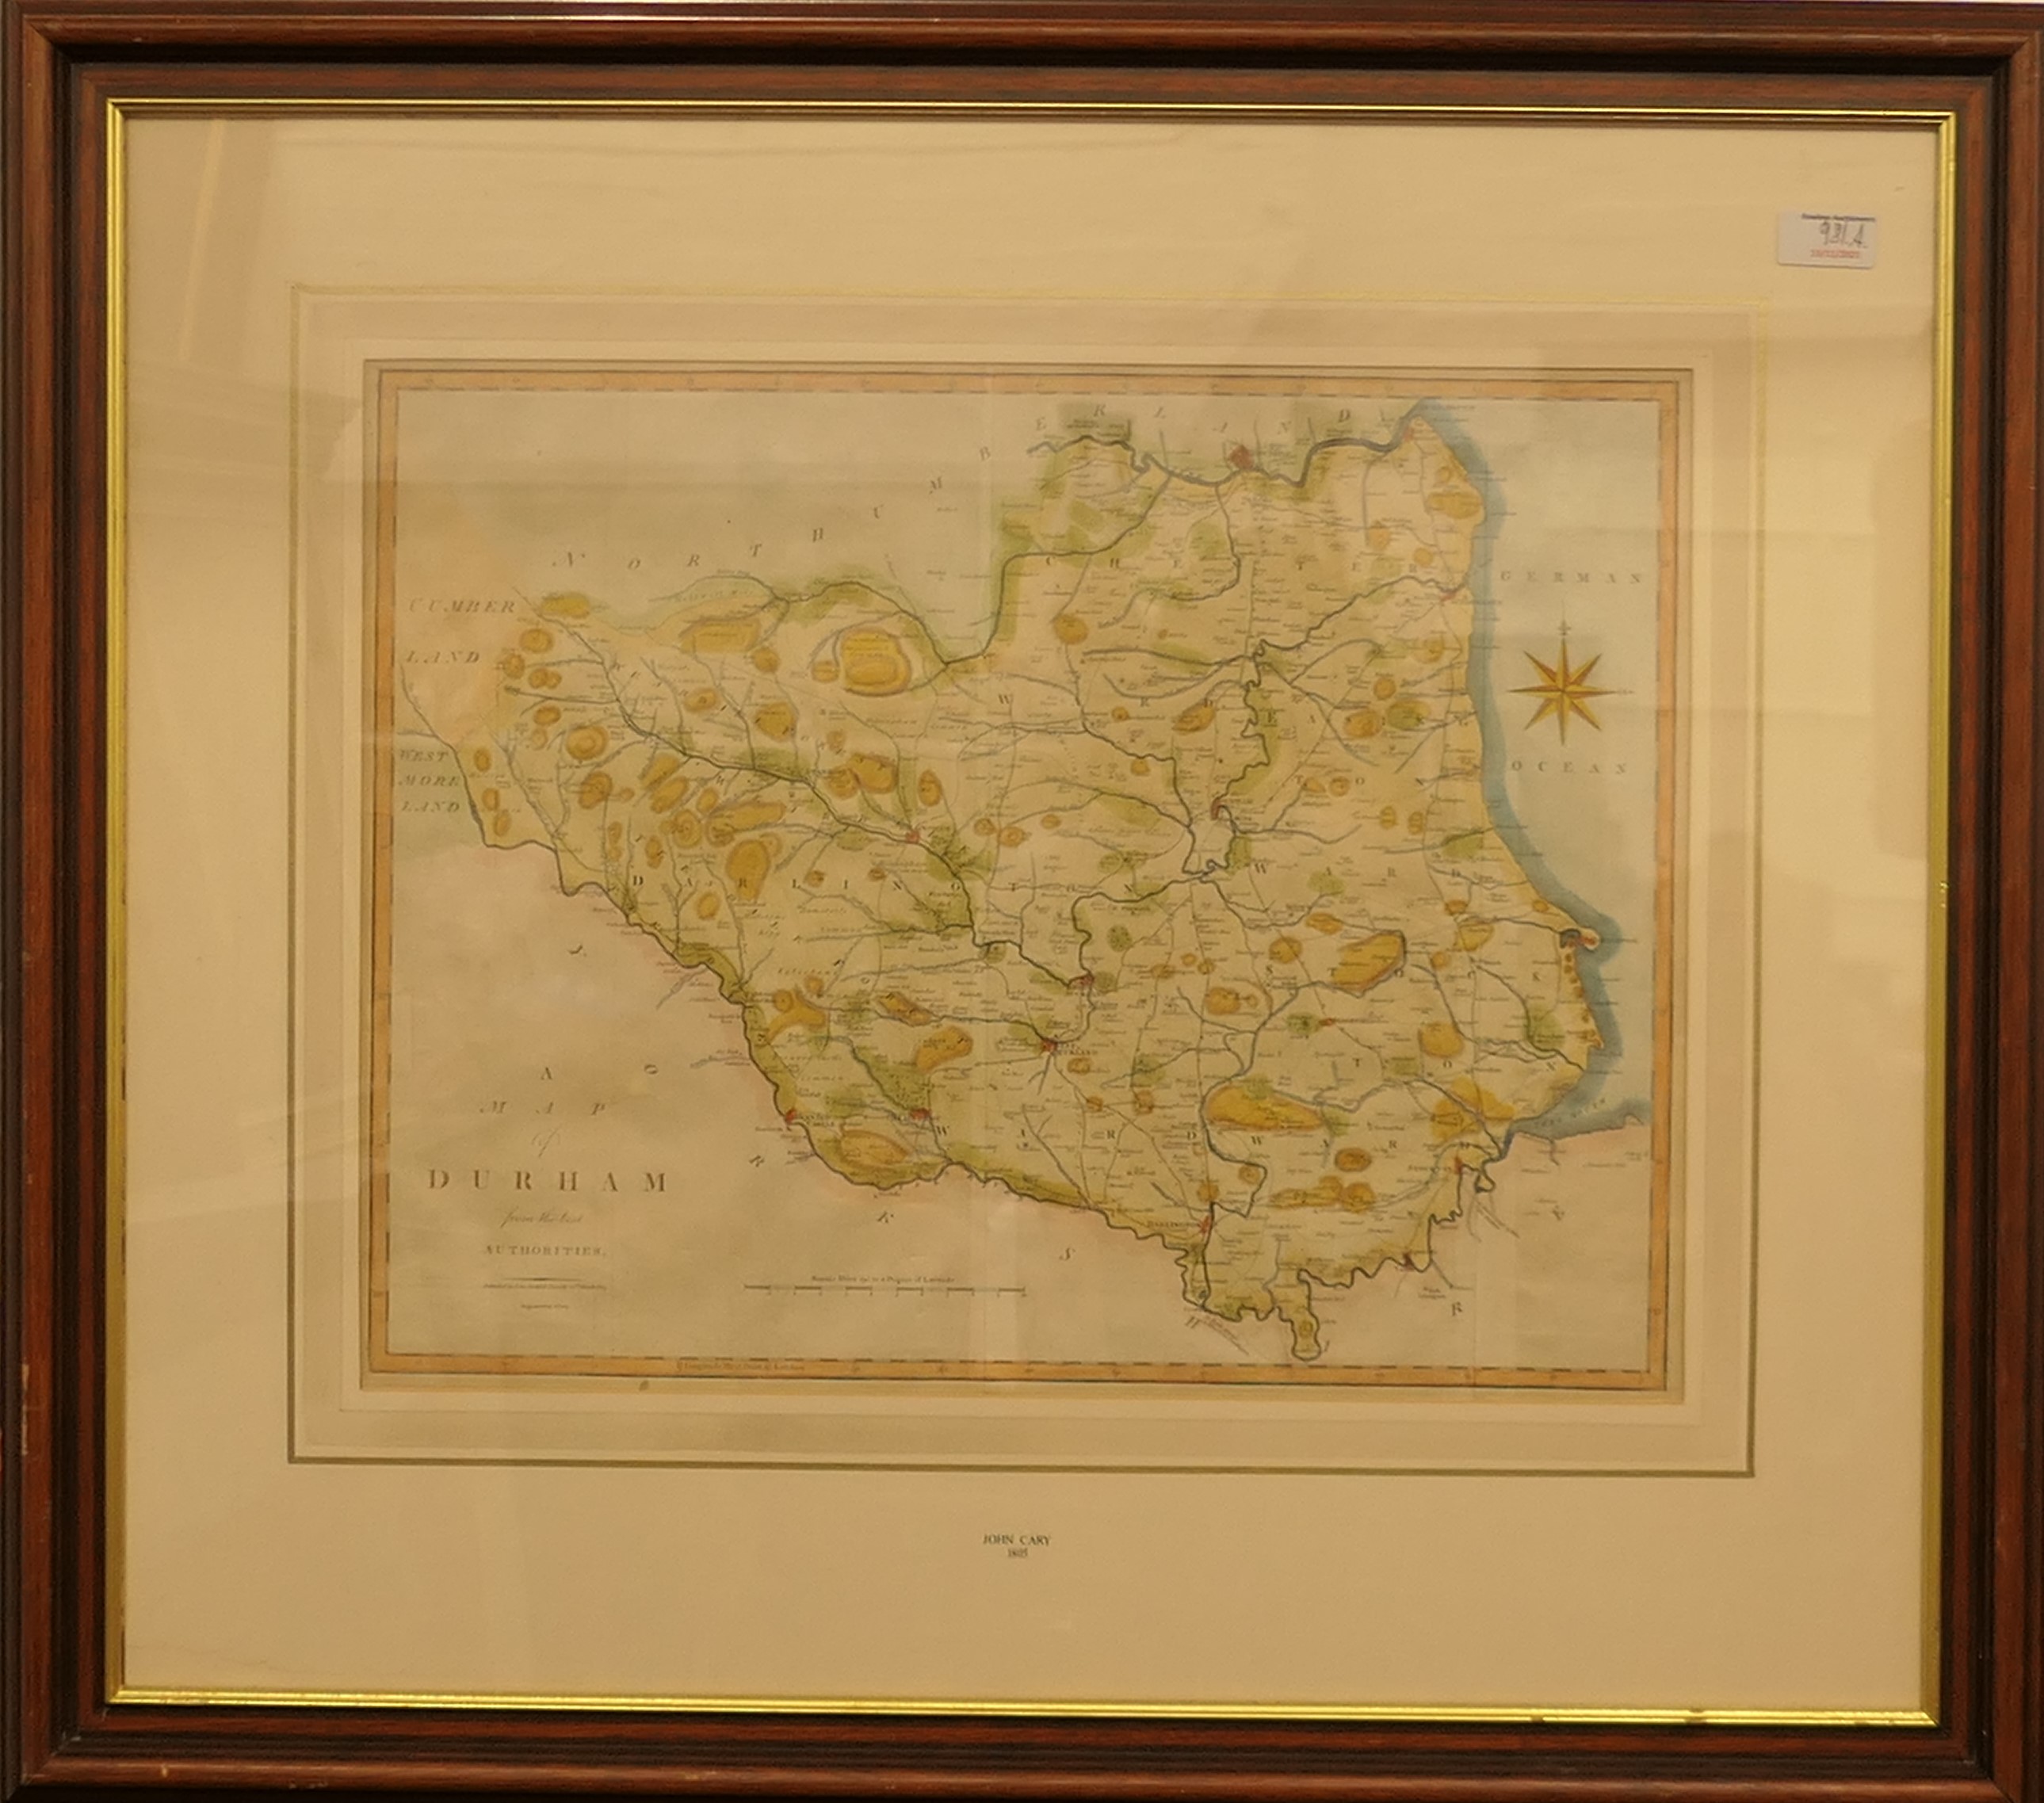 JOHN CASE, a map of Northumberland and Durham, dated 1805, framed and glazed. - Image 2 of 3